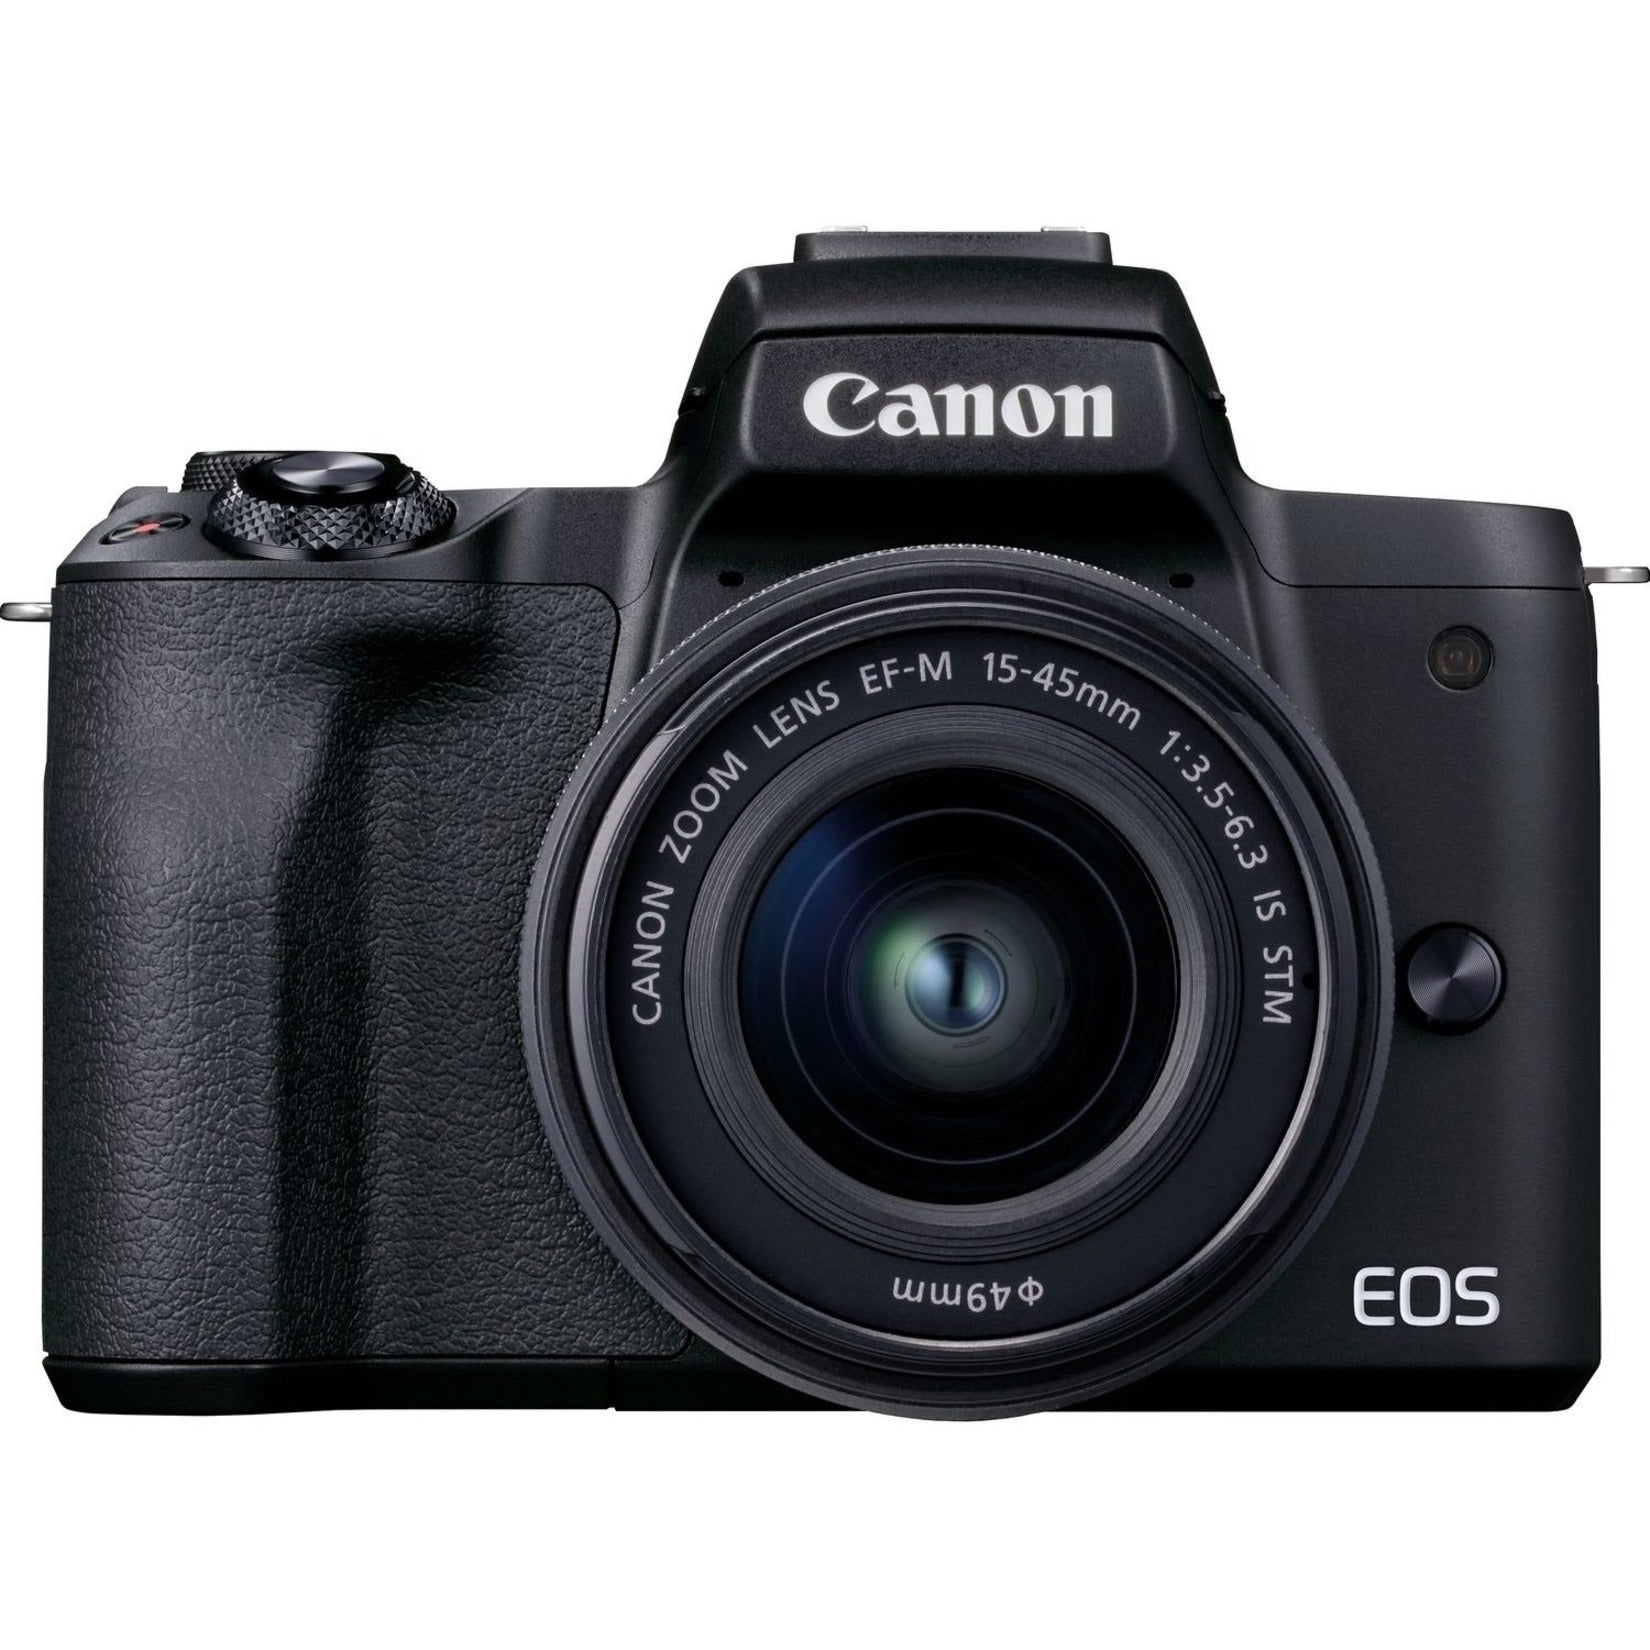 Canon 4728C006 EOS M50 Mark II Mirrorless Camera with EF-M 15-45mm f/3.5-6.3 IS STM Zoom Lens, Black